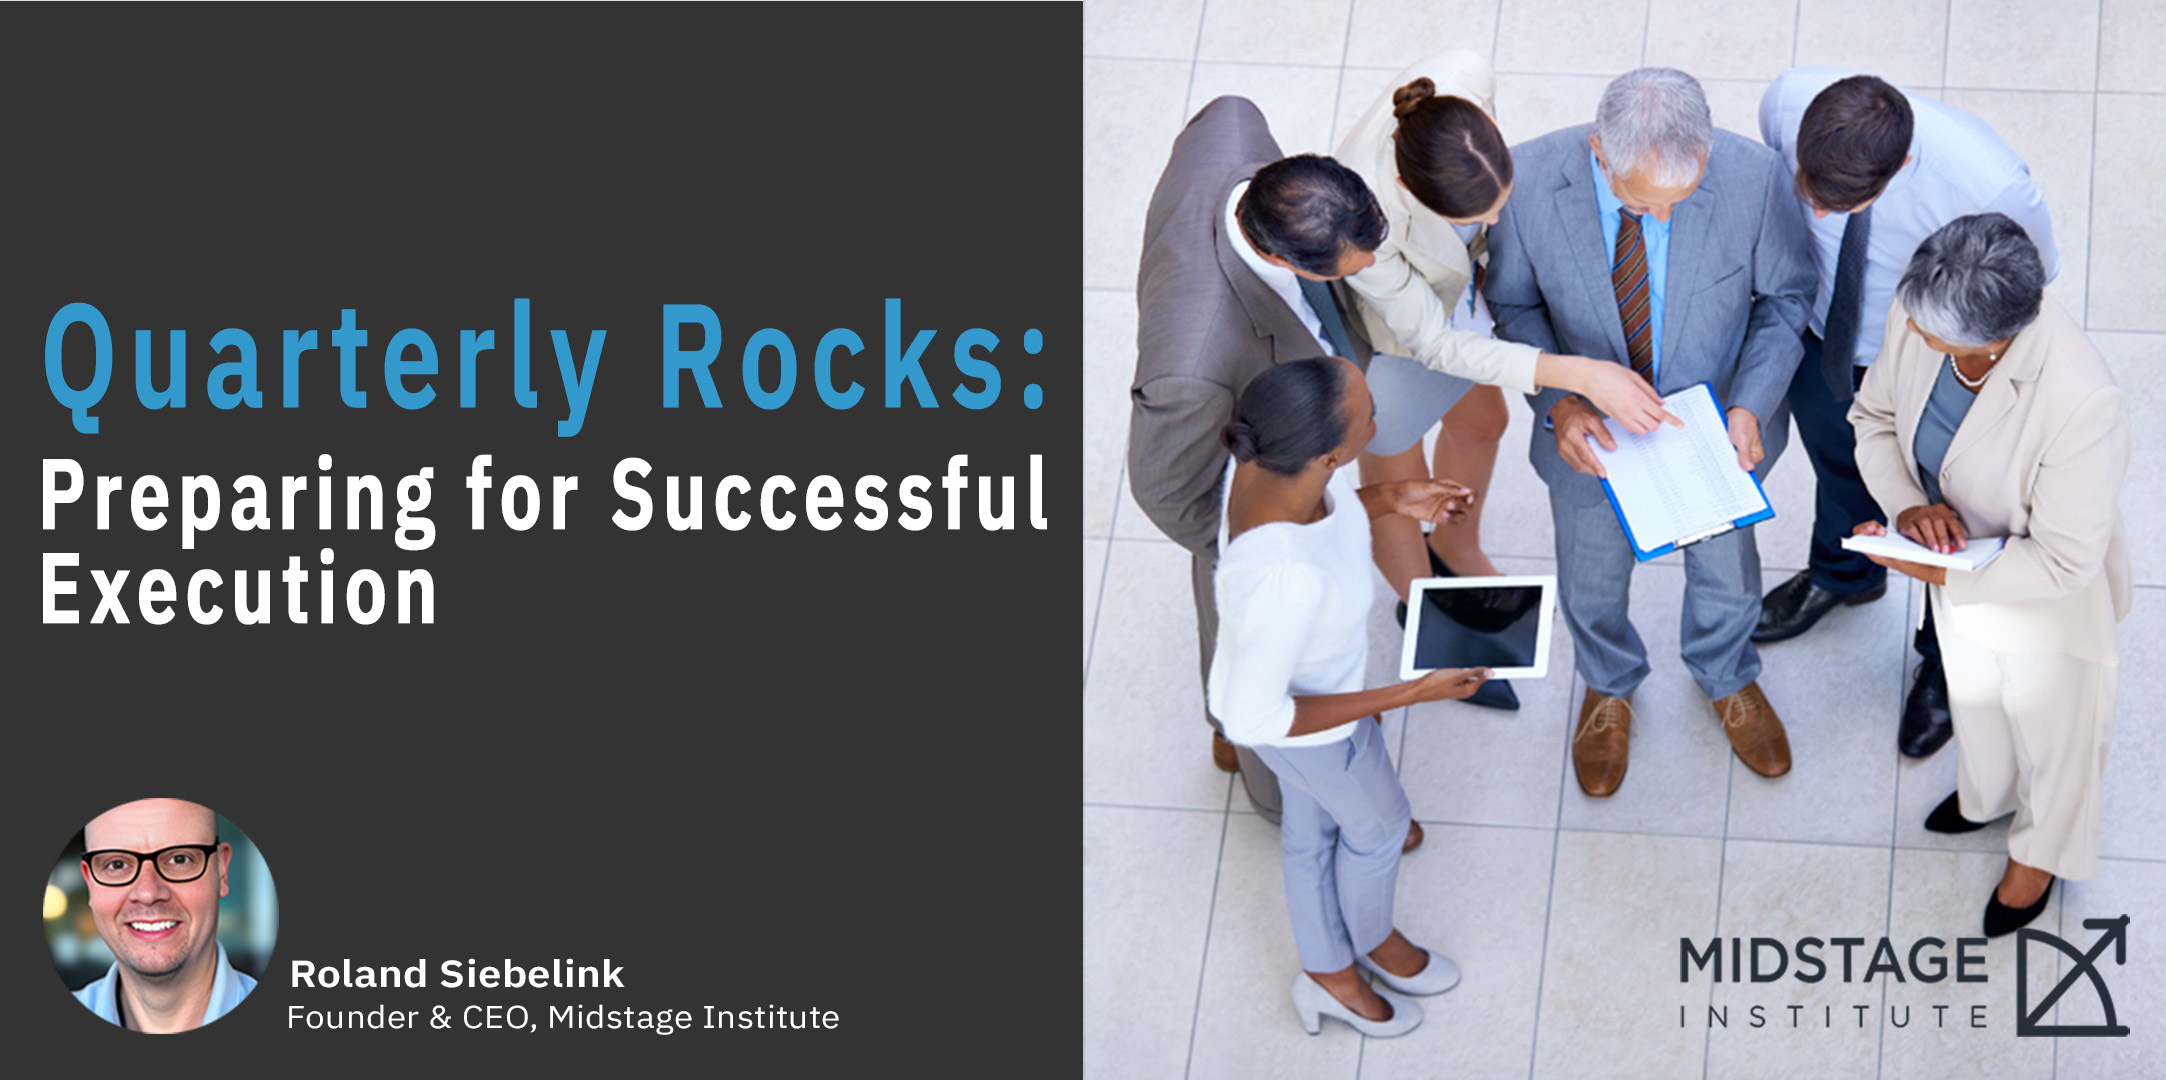 Quarterly Rock Execution Tool Unlocking Success Through Clear Planning and Methodical Execution